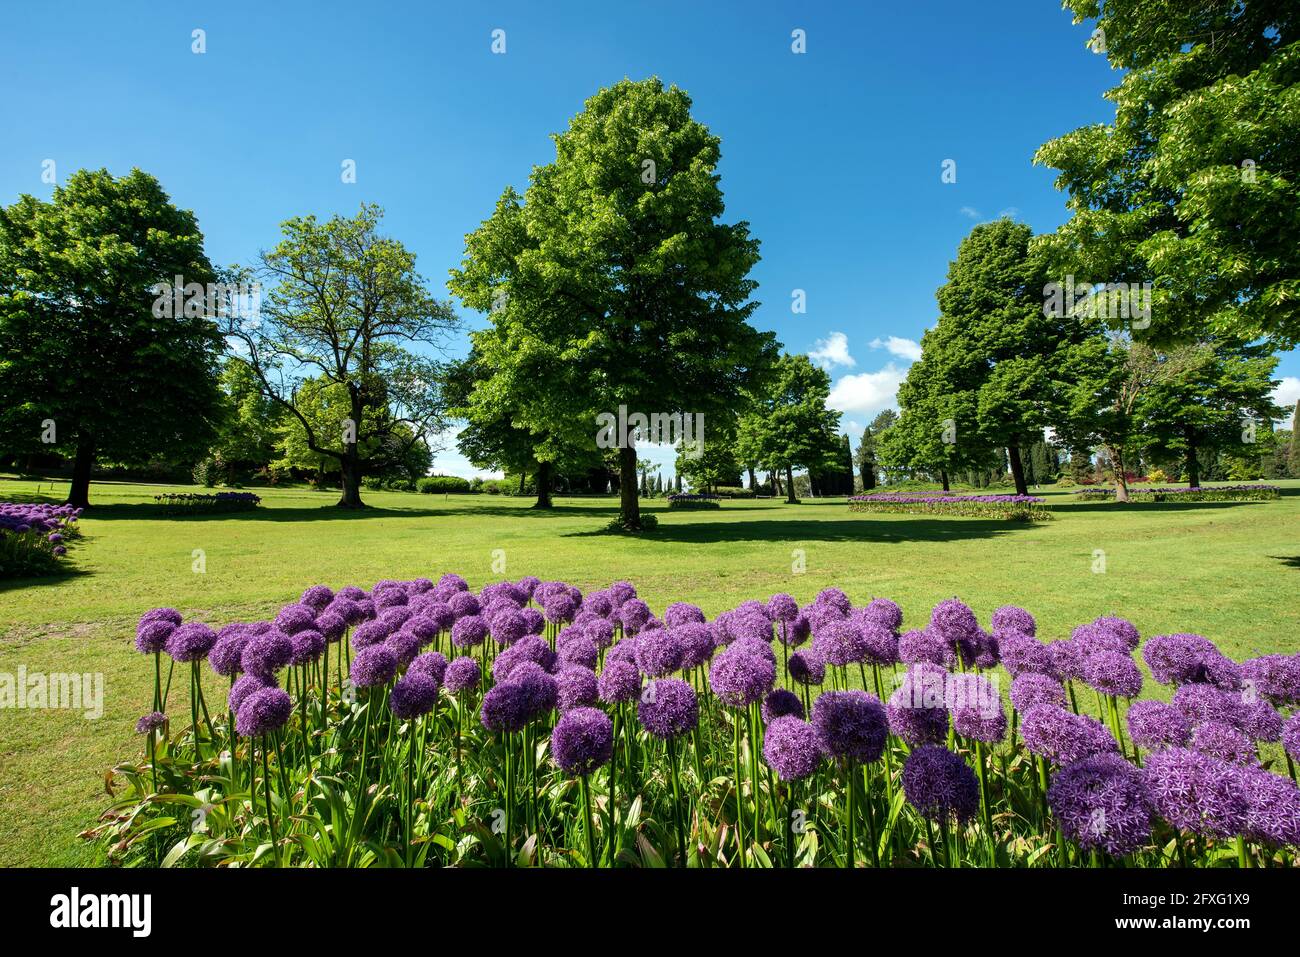 Colorful purple Allium or Pom-pom flowers growing in a flowerbed in a park or garden with green lawns and cypress trees in a scenic landscape Stock Photo